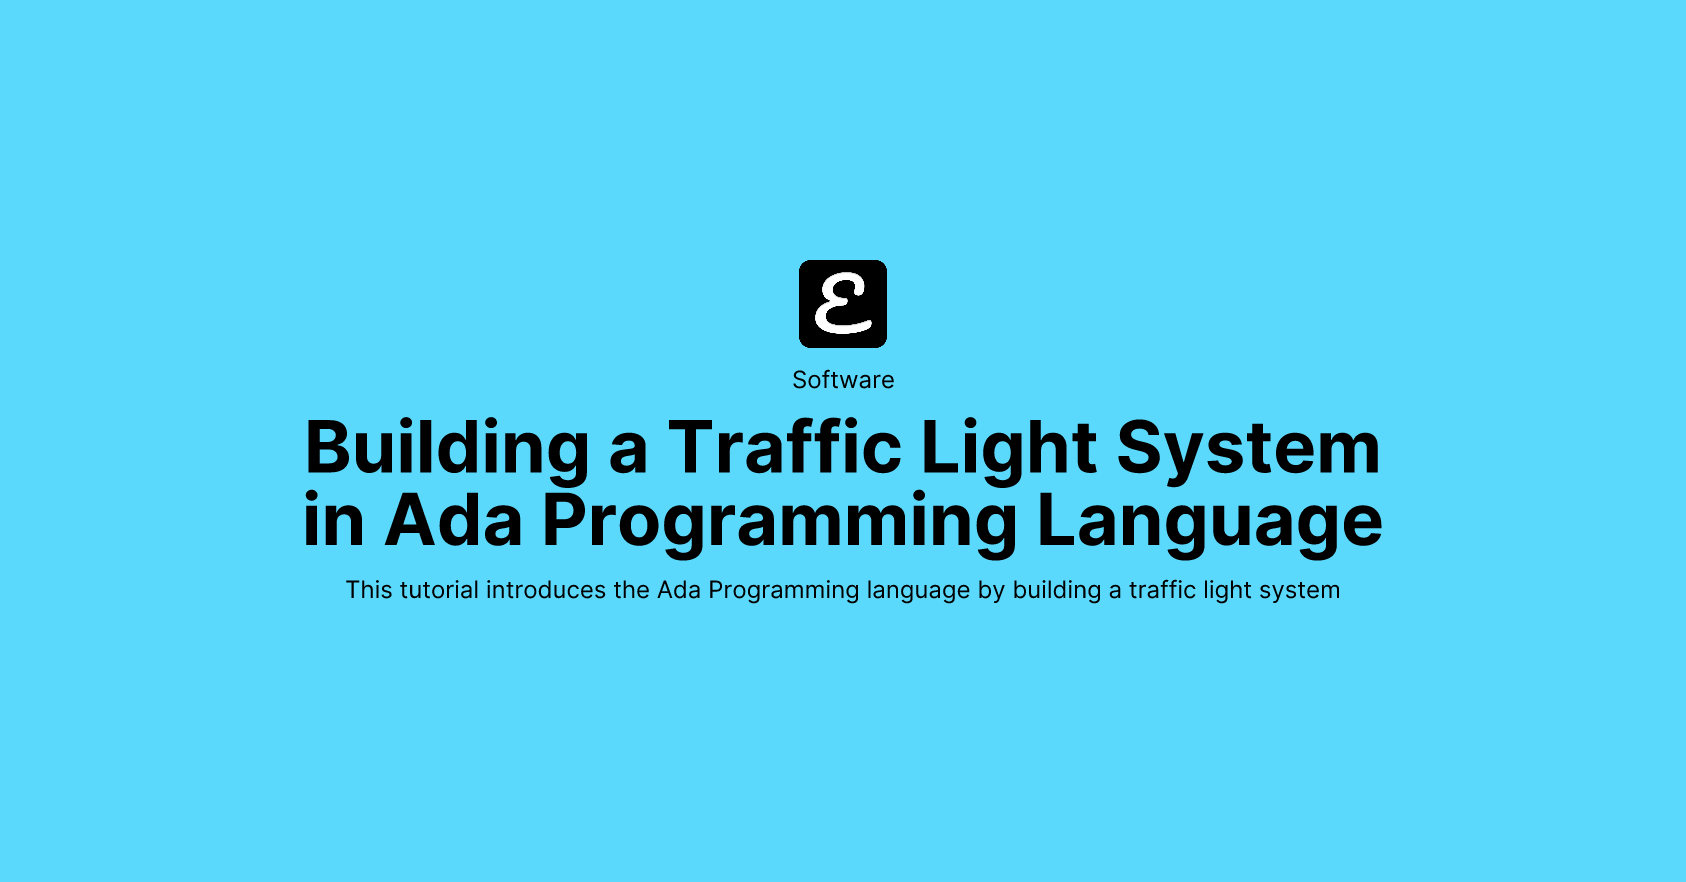 Building a Traffic Light System in Ada Programming Language by Eric David Smith